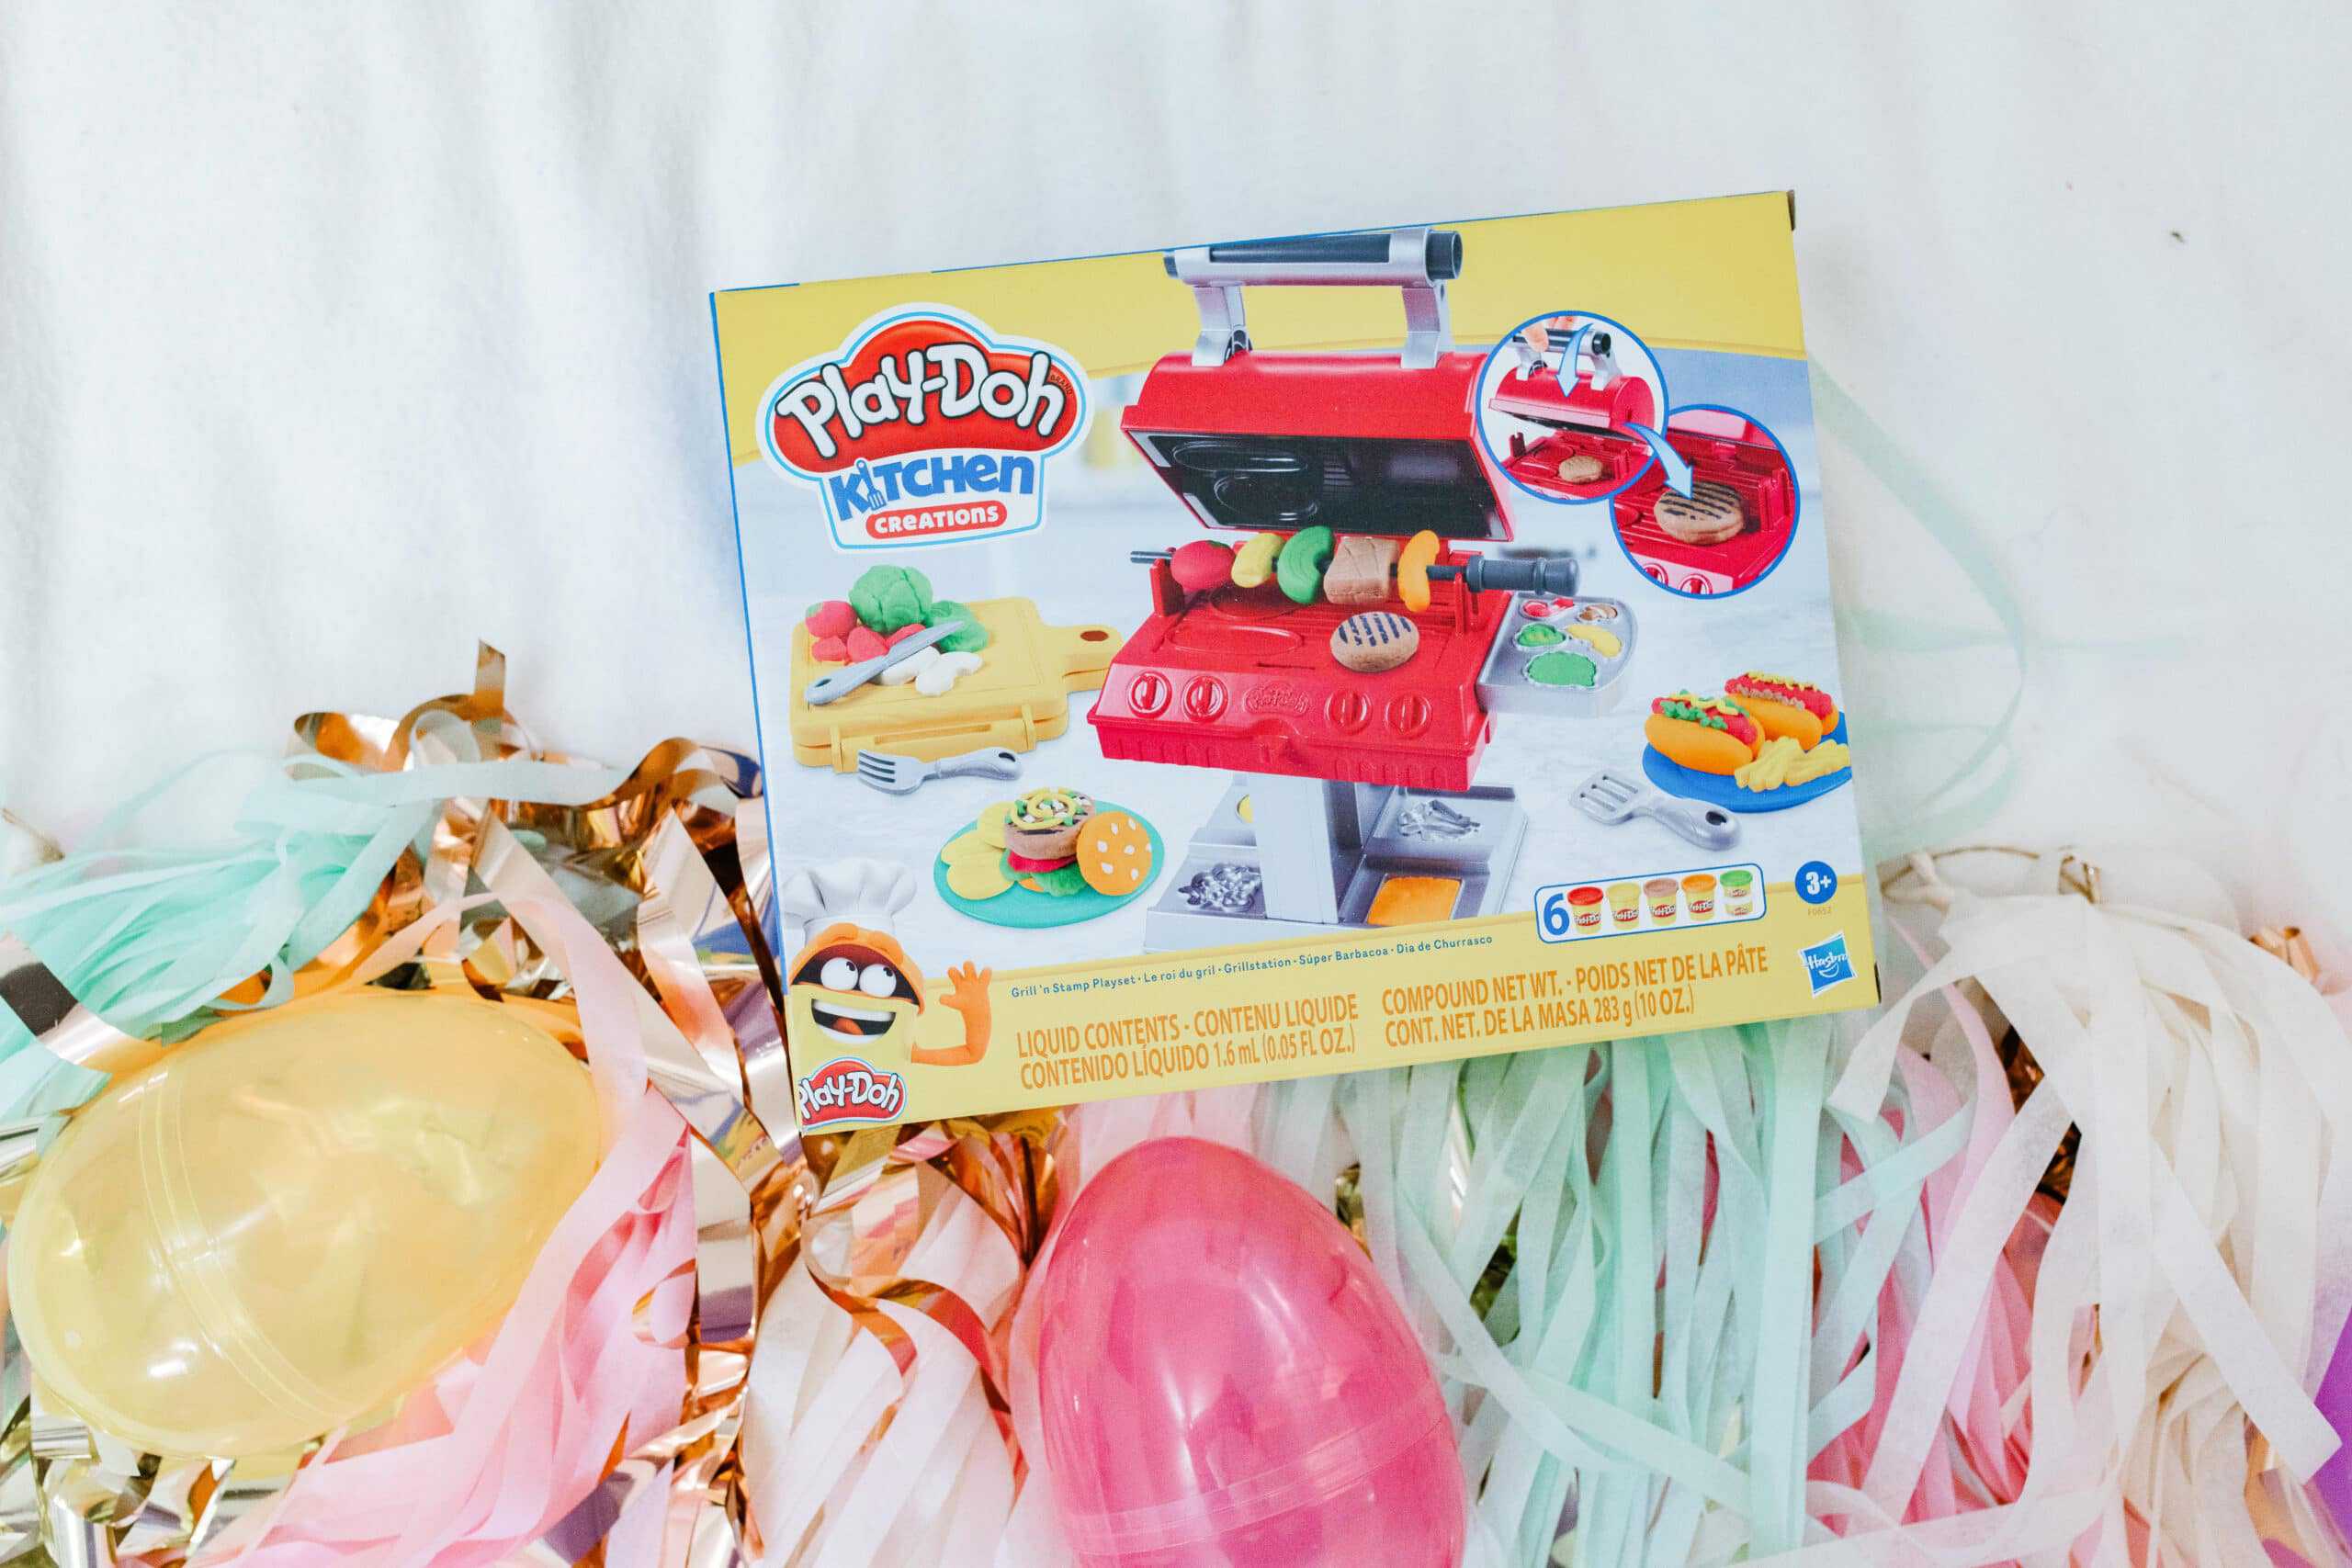 PLAY-DOH KITCHEN CREATIONS GRILL ‘N STAMP PLAYSET